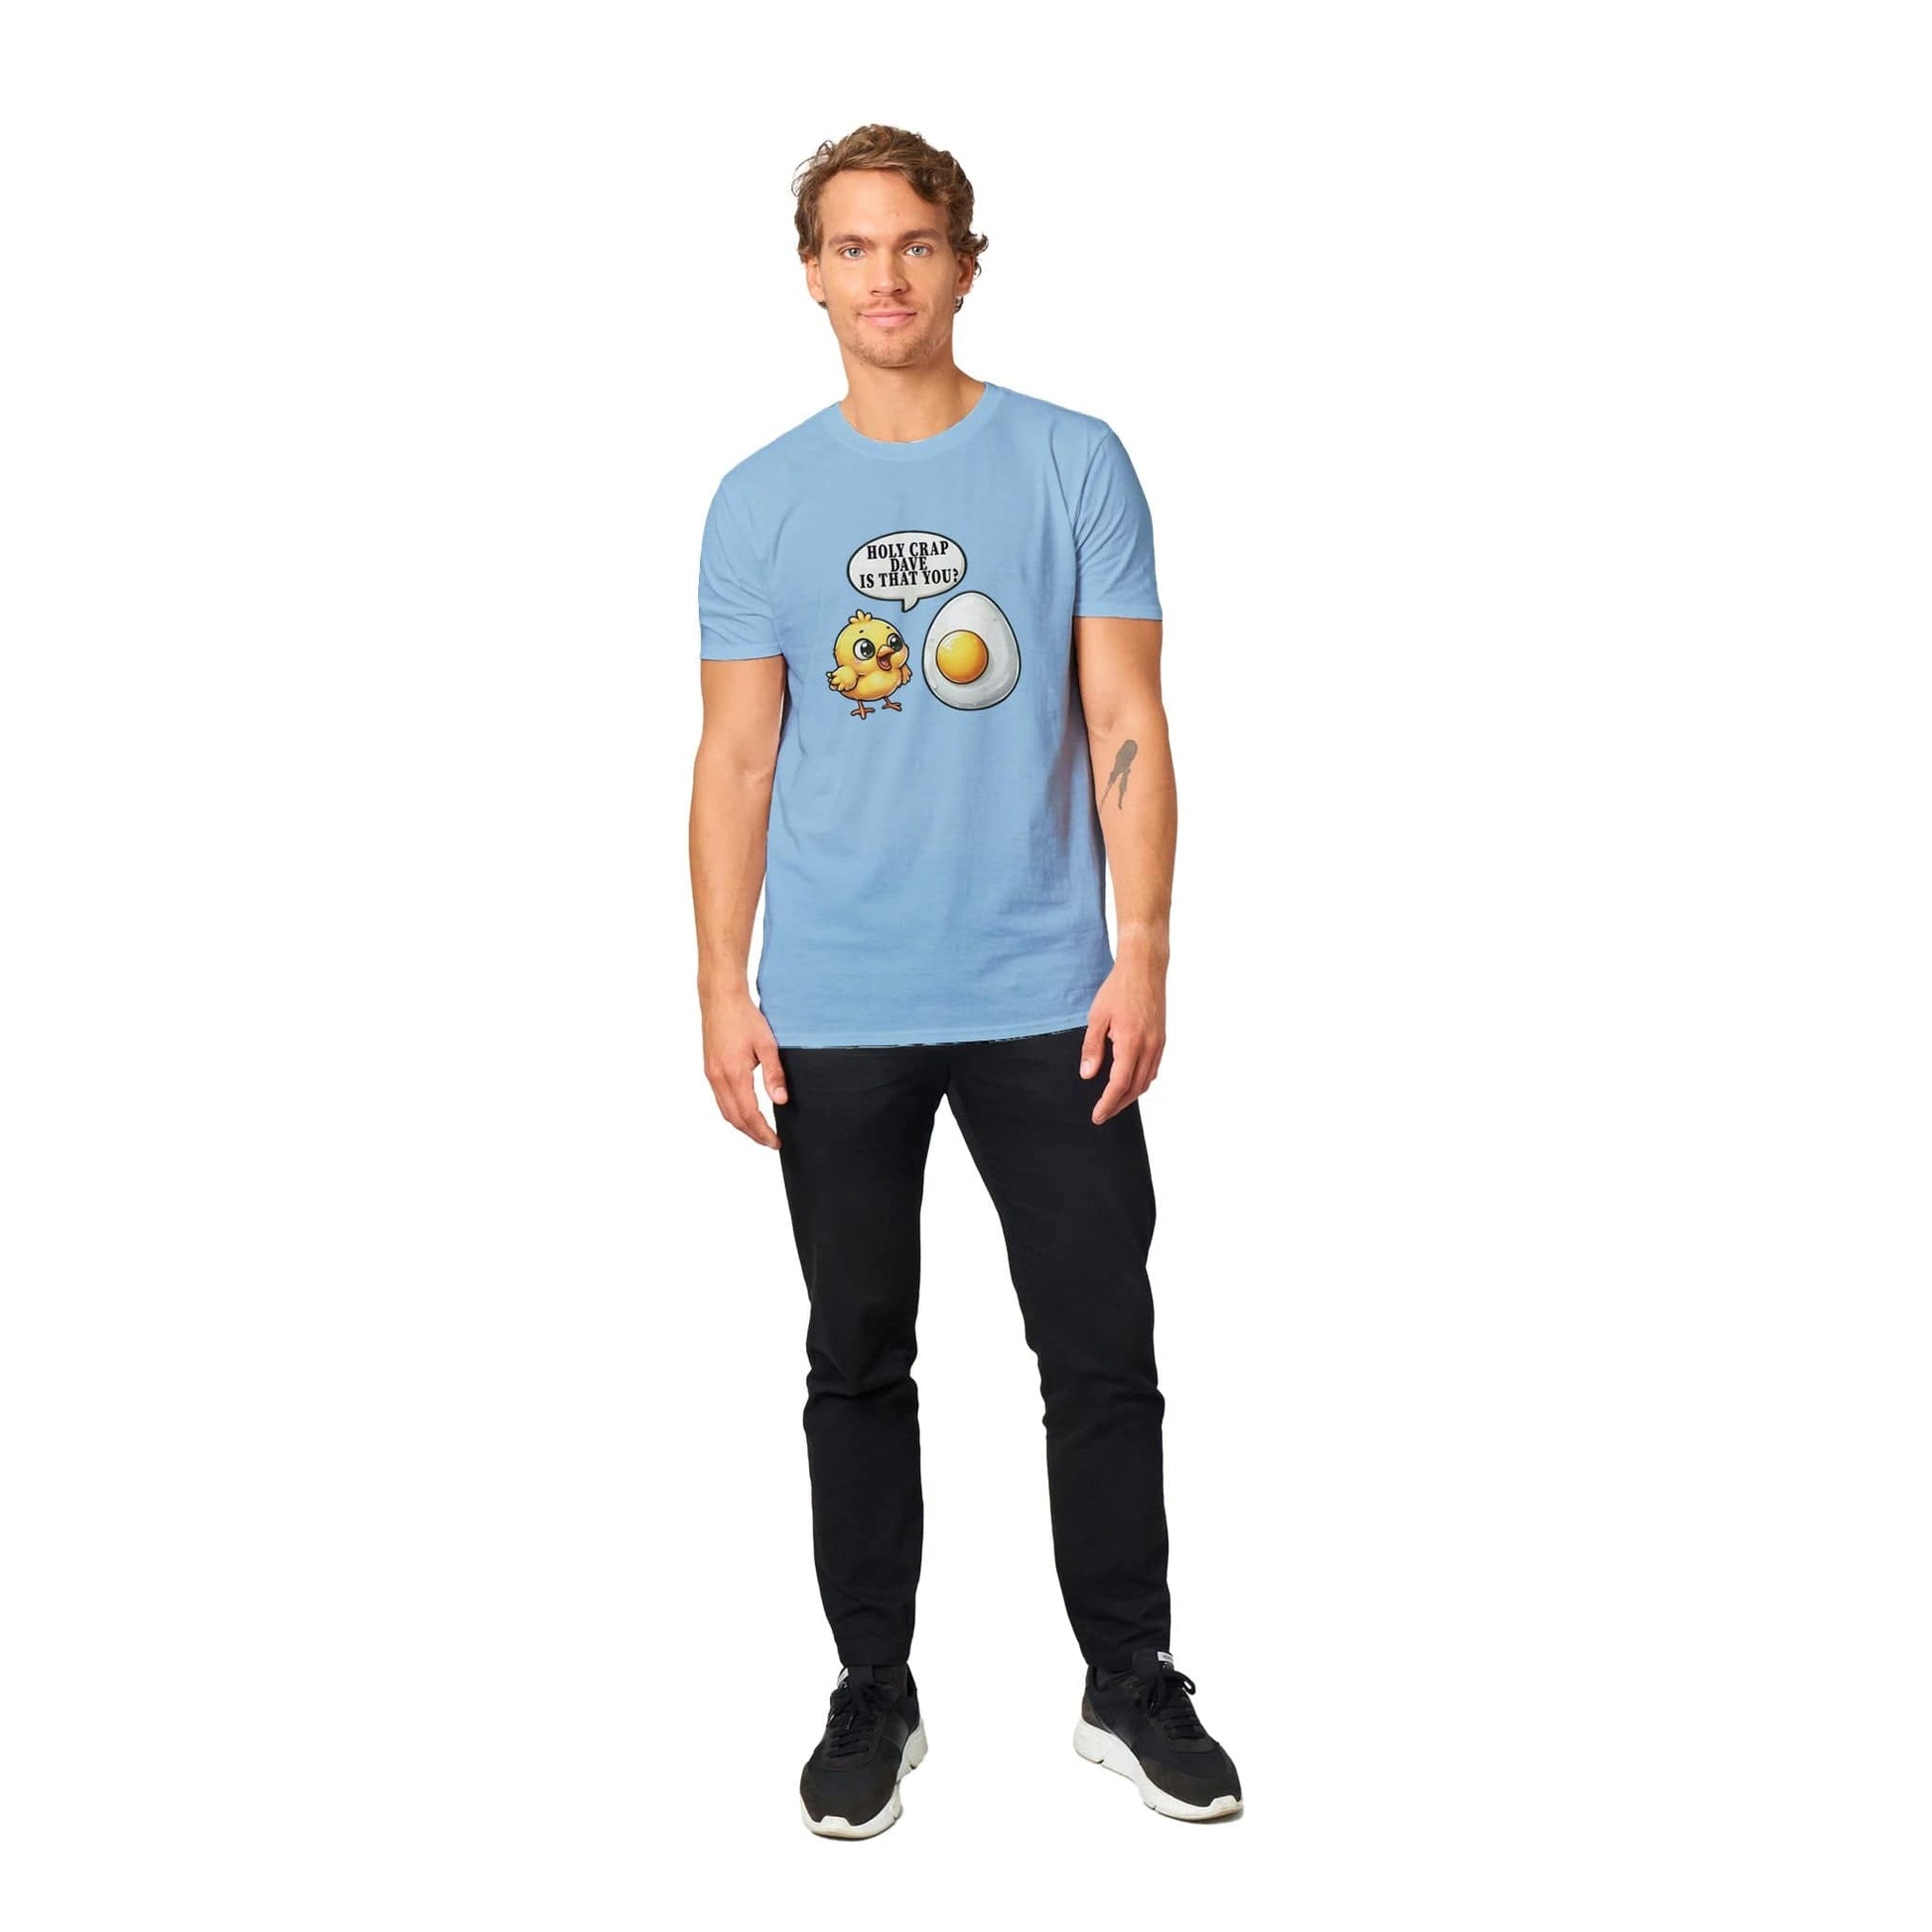 Is That You Dave? T-SHIRT Graphic Tee BC Australia